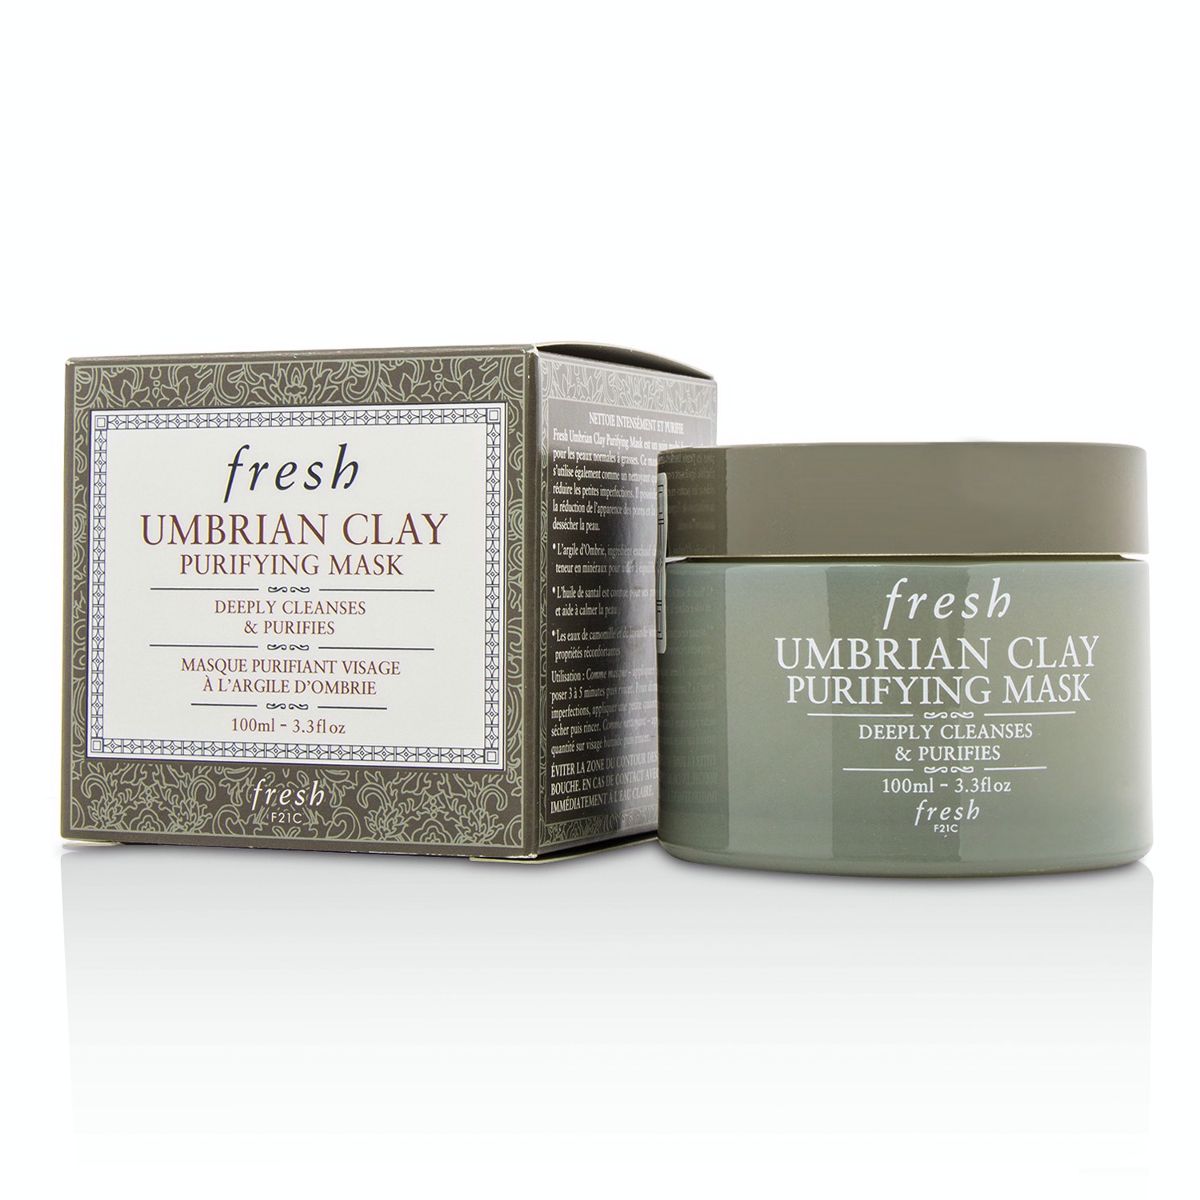 Umbrian Clay Purifying Mask - For Normal to Oily Skin Fresh Image